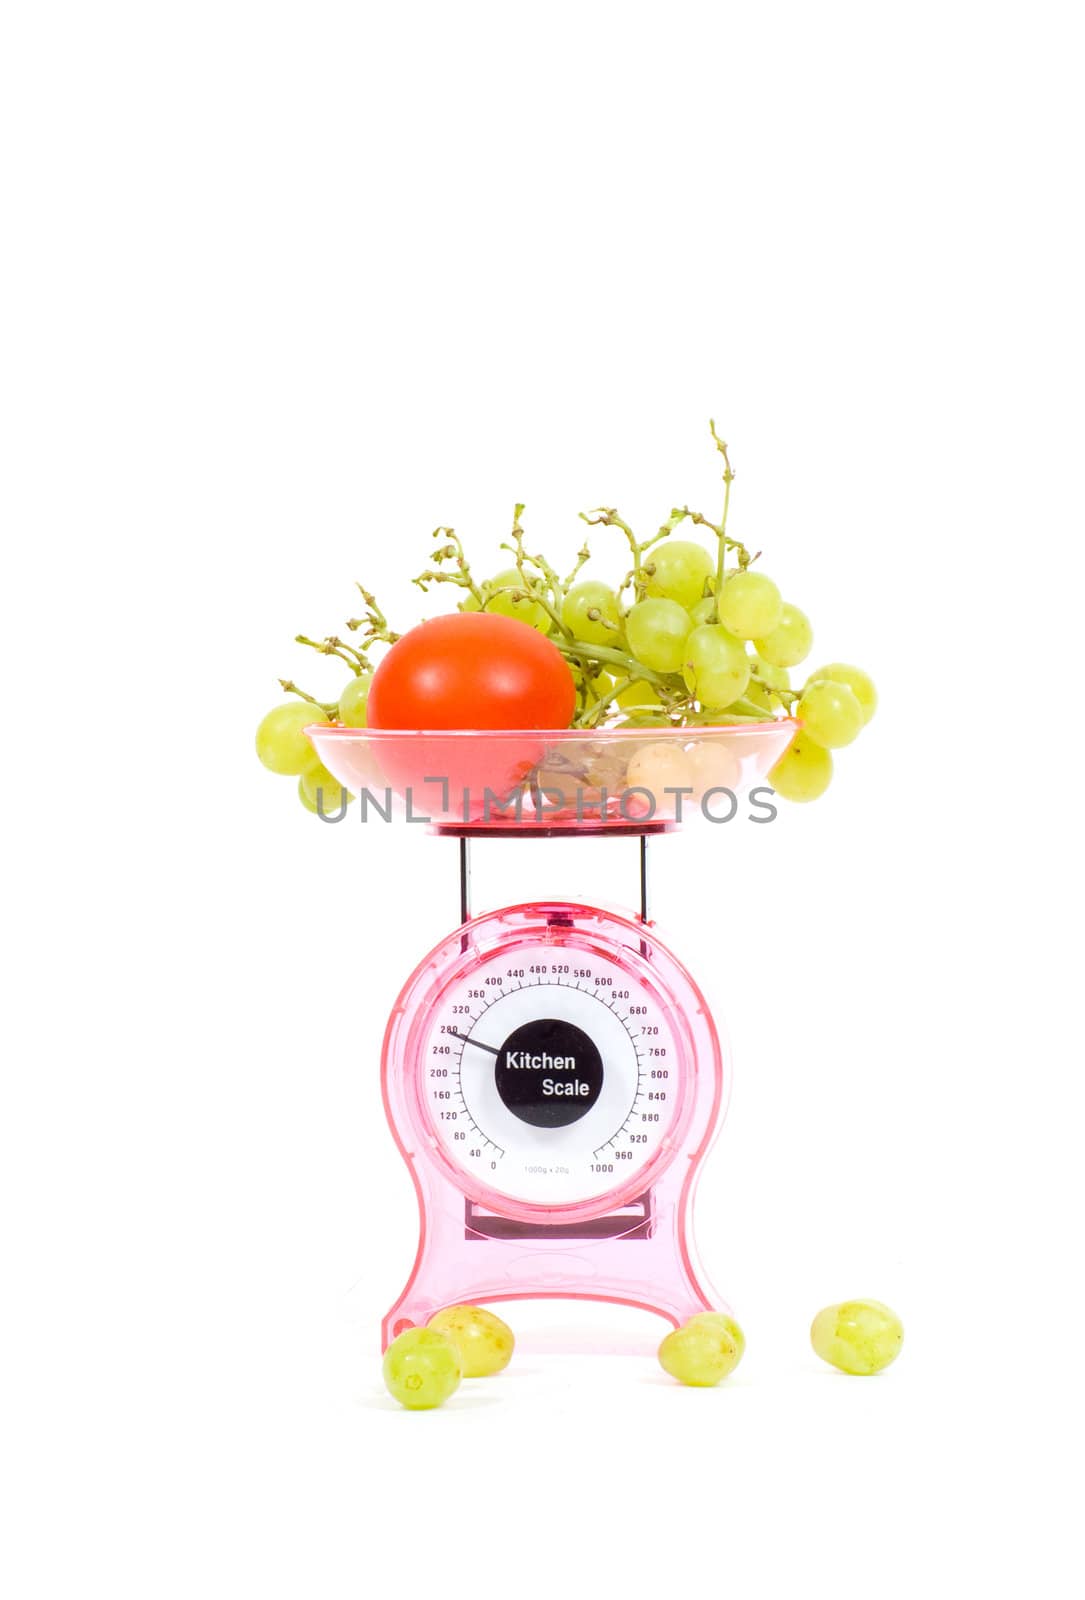 Kitchen Scales with fresh tomatoes and grapes by ladyminnie